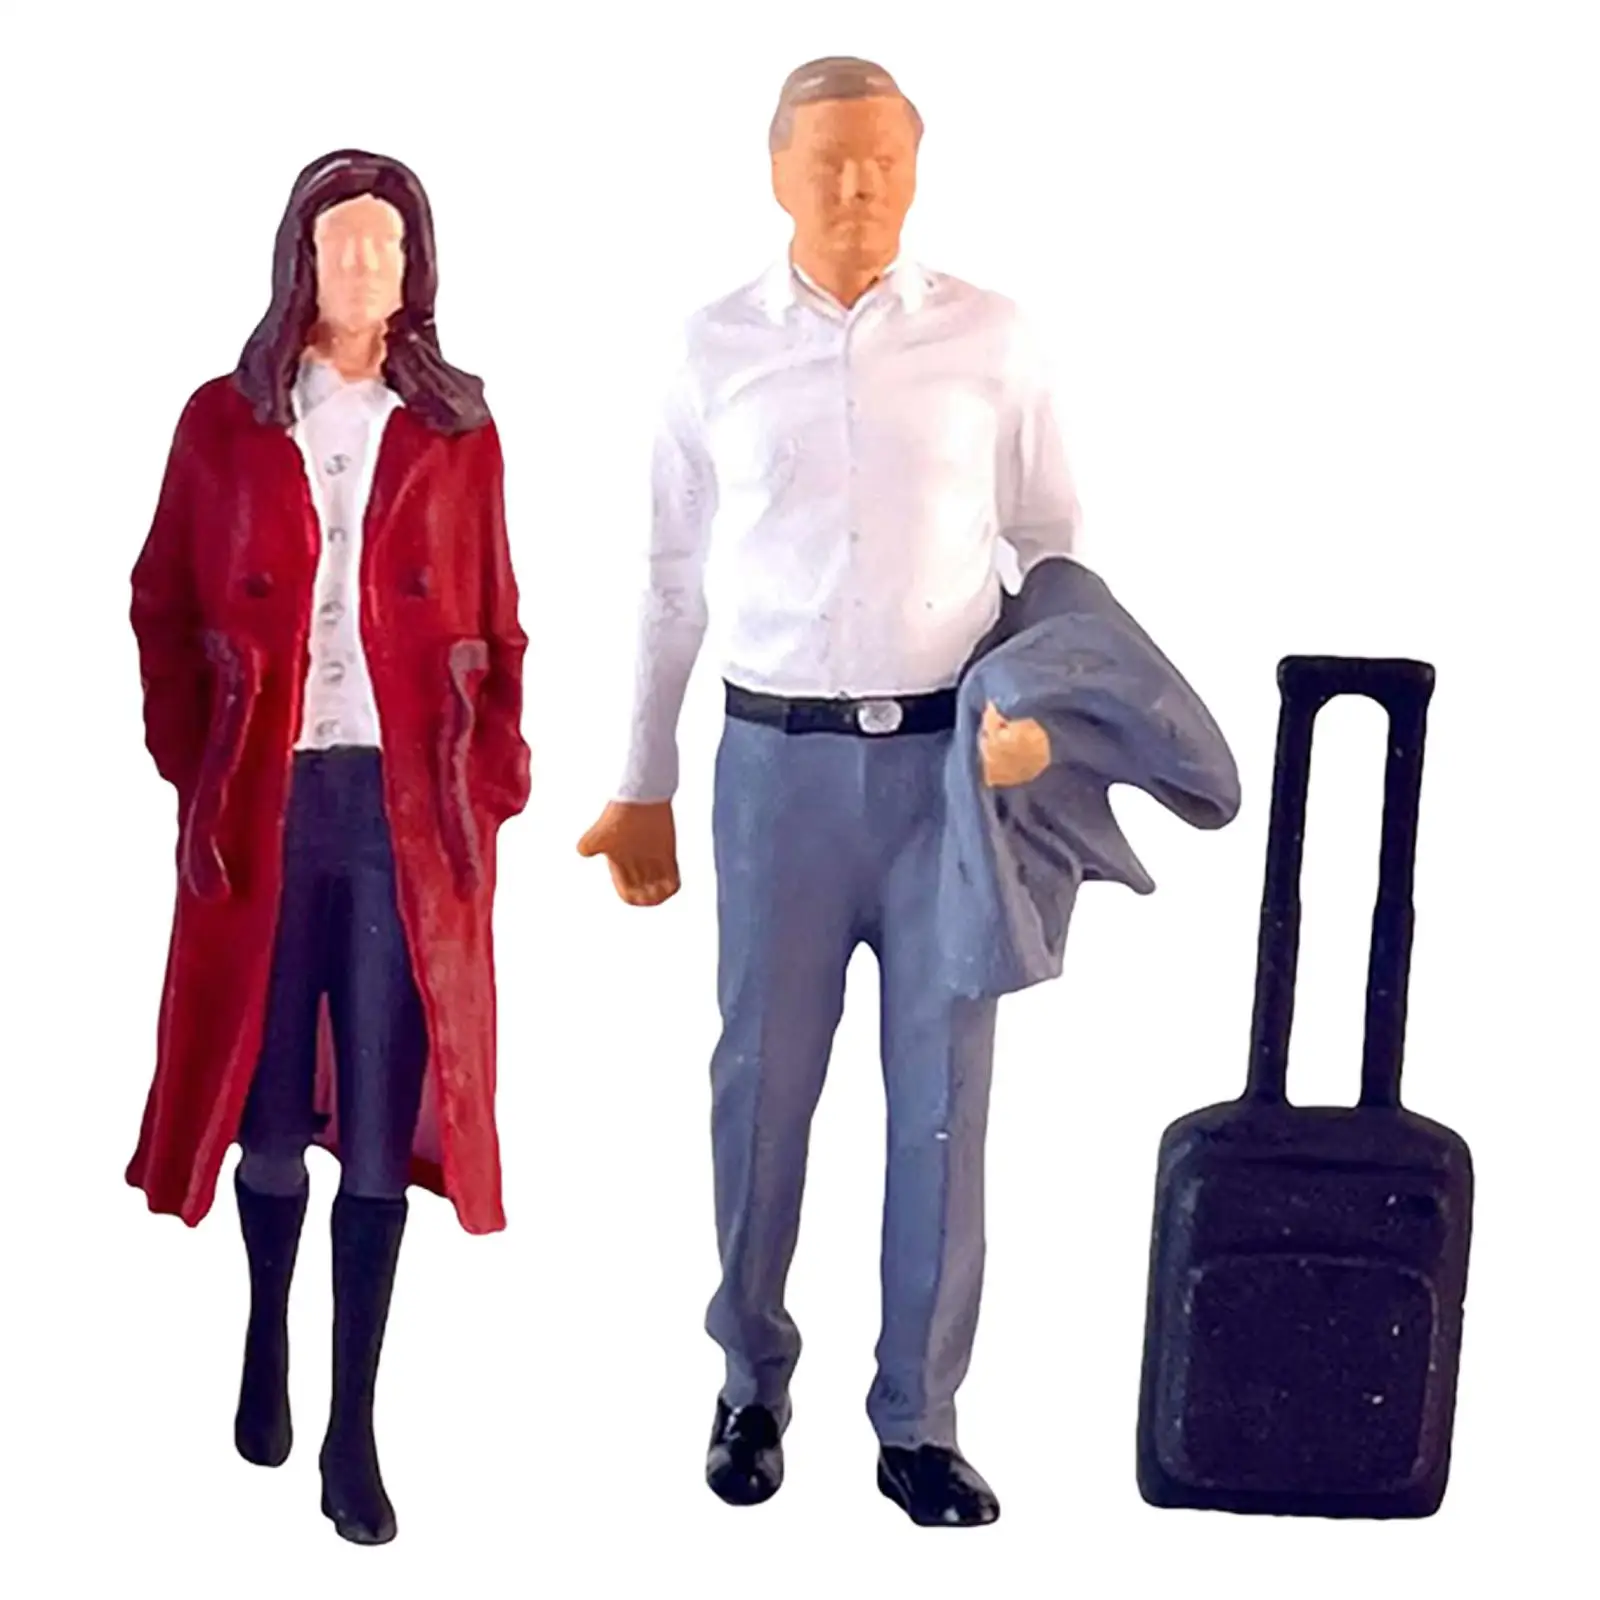 2 Pieces 1:64 Scale Women and Men Figures with Suitcase Model Layout Movie Props Fairy Garden S Gauge Resin Figurines Decoration